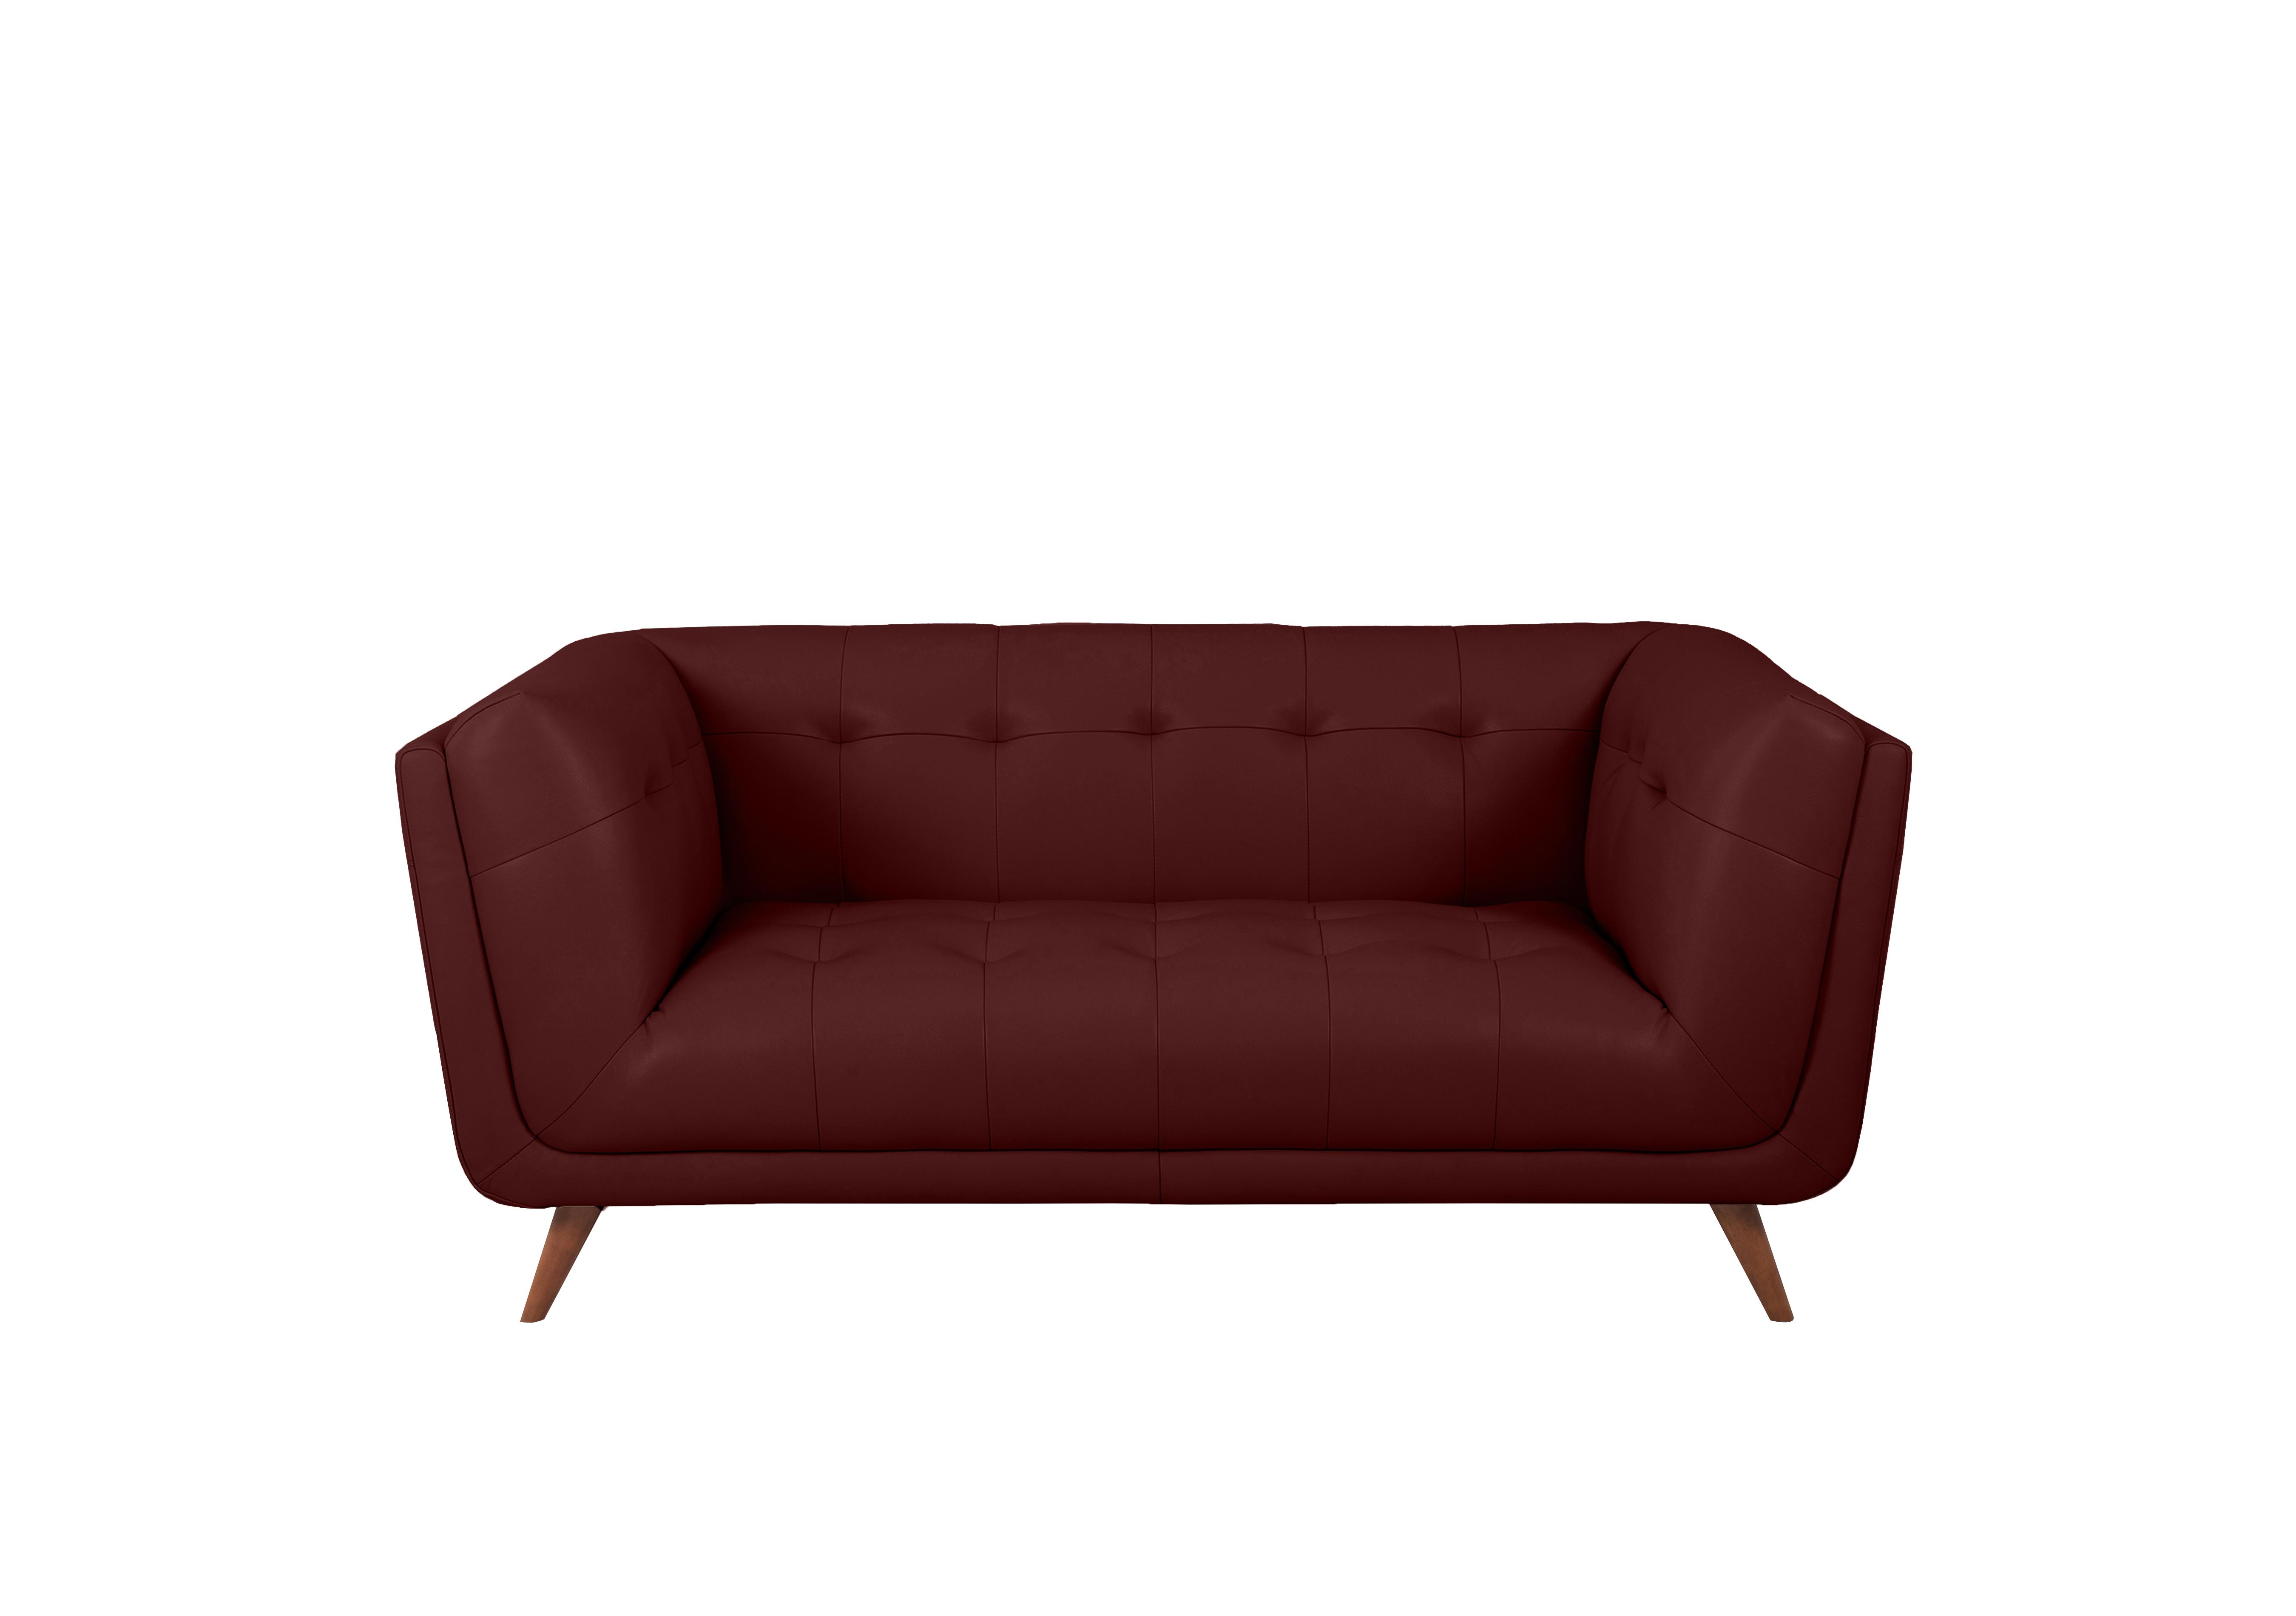 Rene 2 Seater Leather Sofa in Montana Ruby on Furniture Village